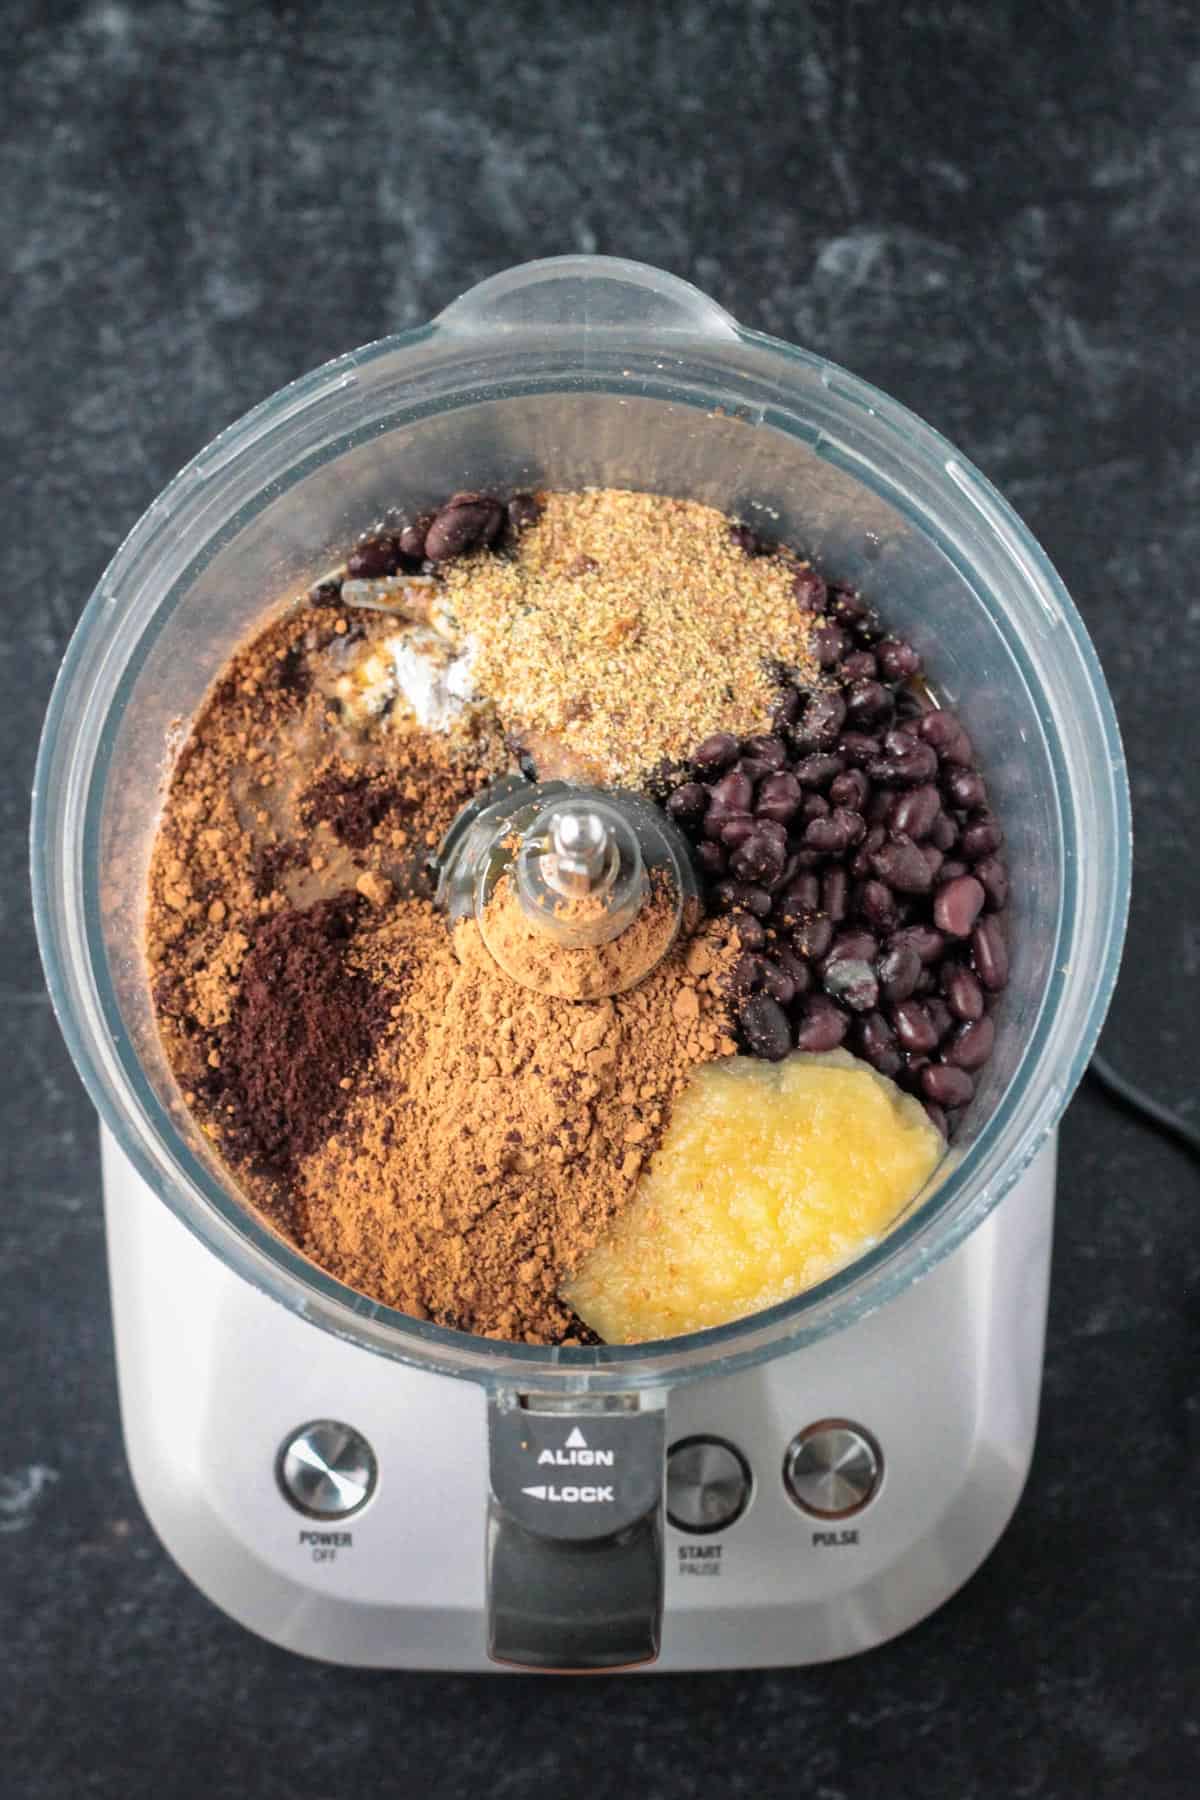 Ingredients in the bowl of a food processor.